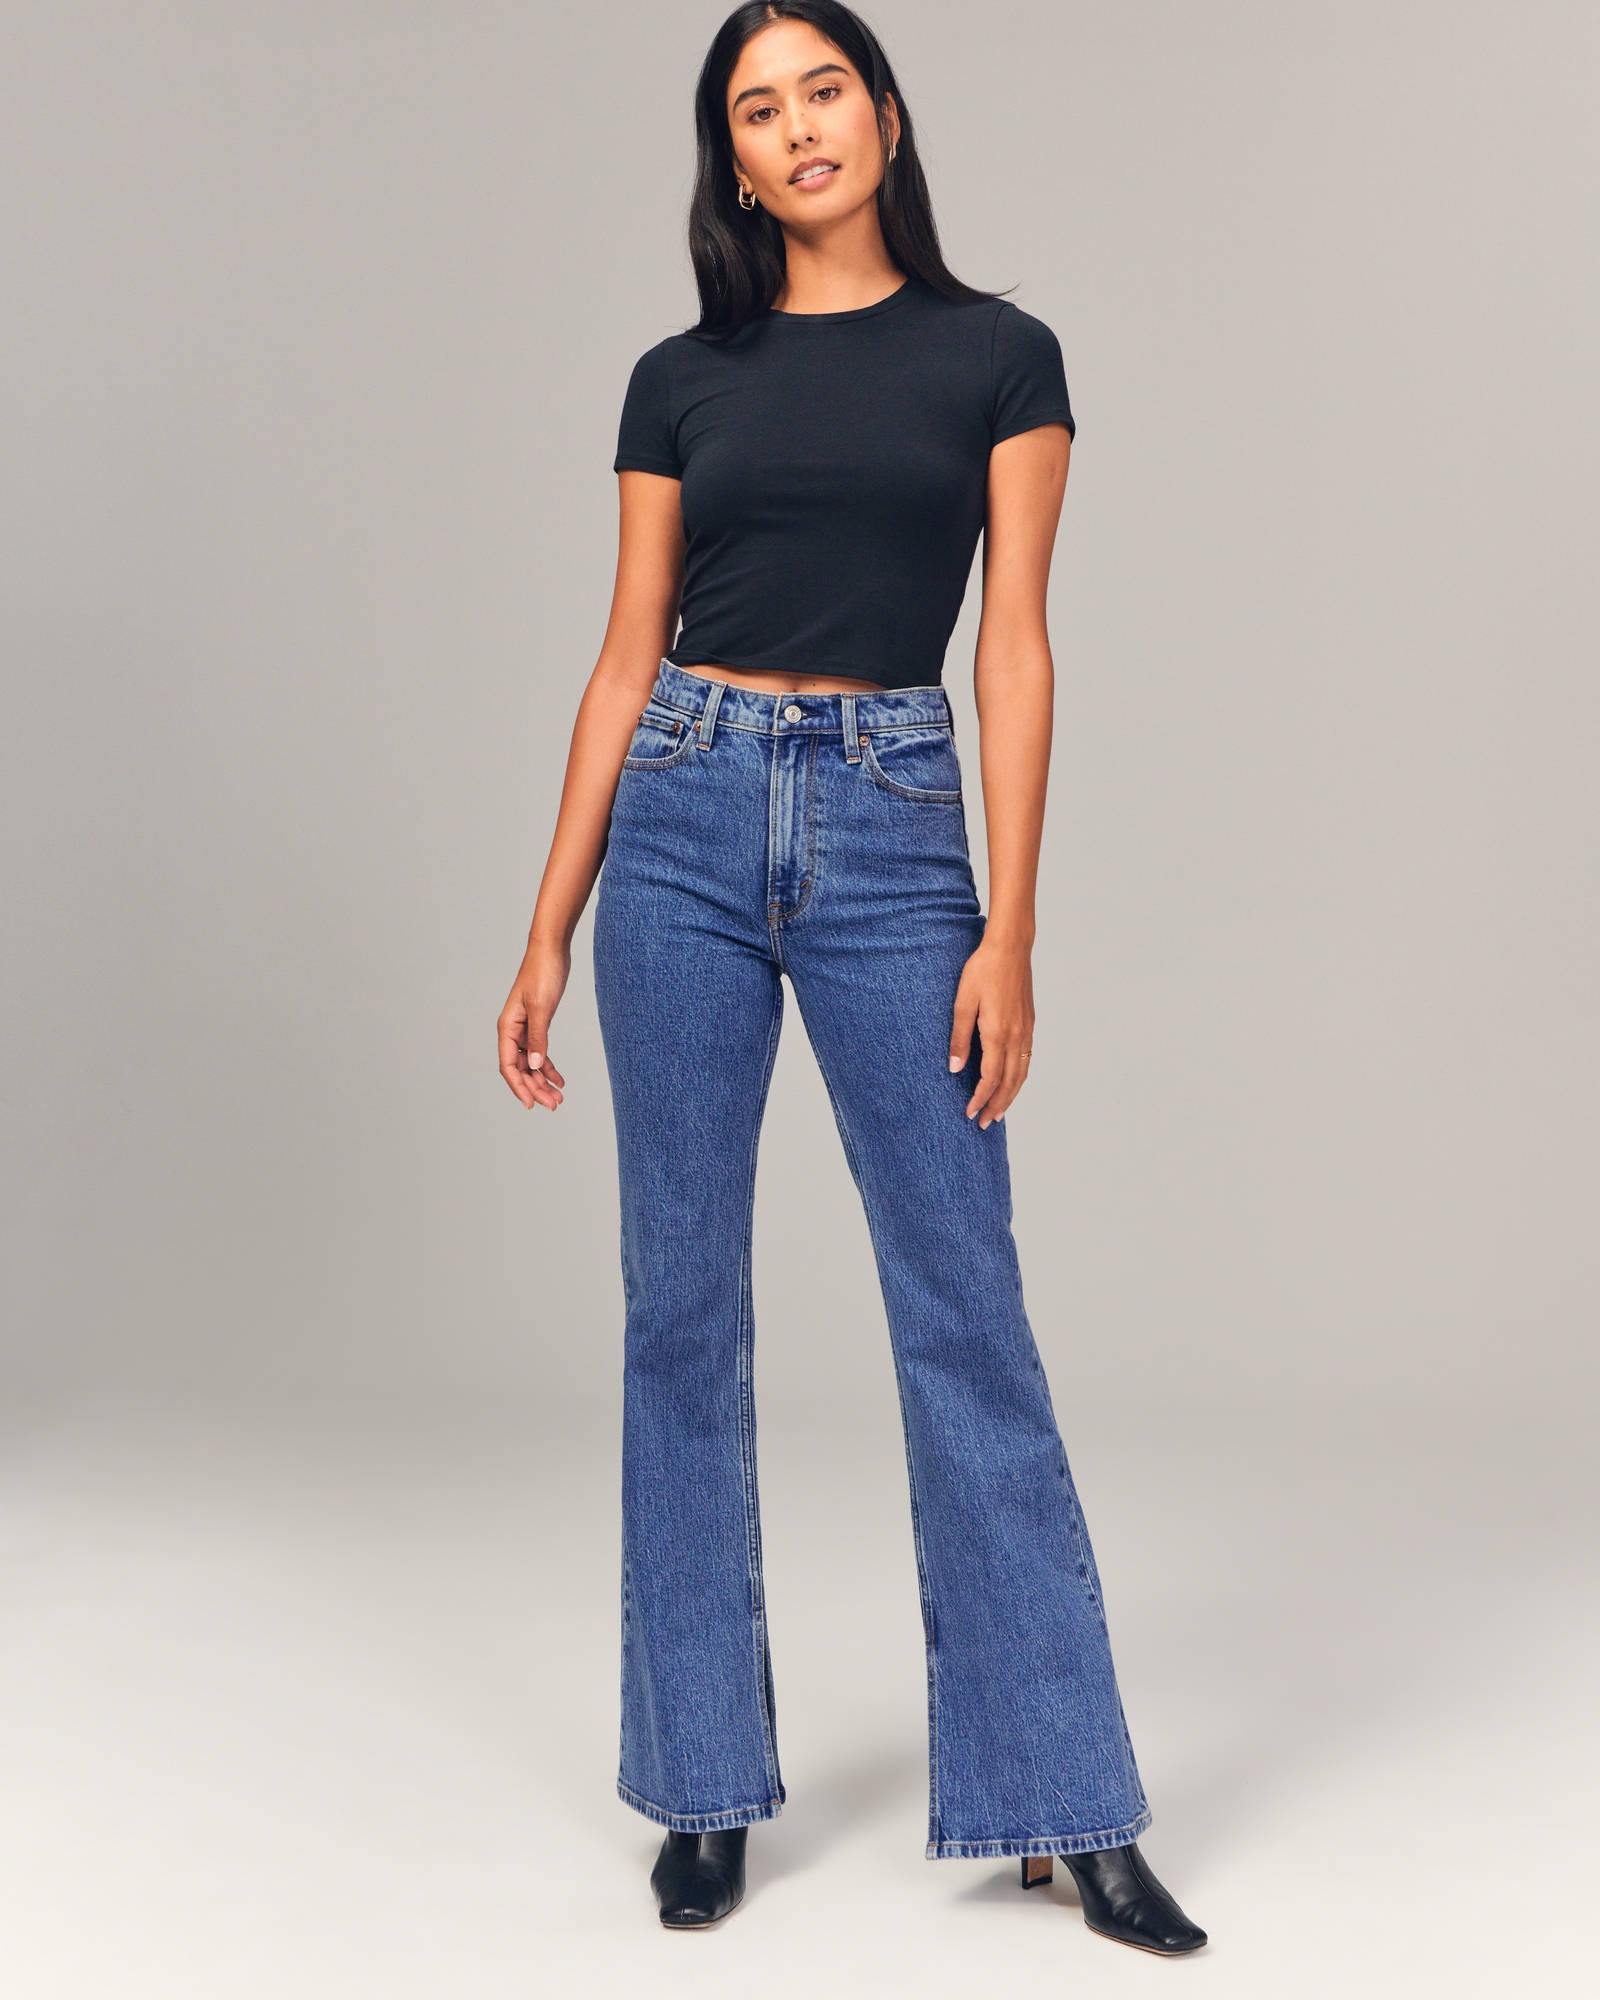 Vintage High Waist Flared Skinny Jeans For Women Khaki, Black, And Brown  Stretch Denim Pants Clothing Flared Trousers Women Jean 210629 From Mu04,  $17.07